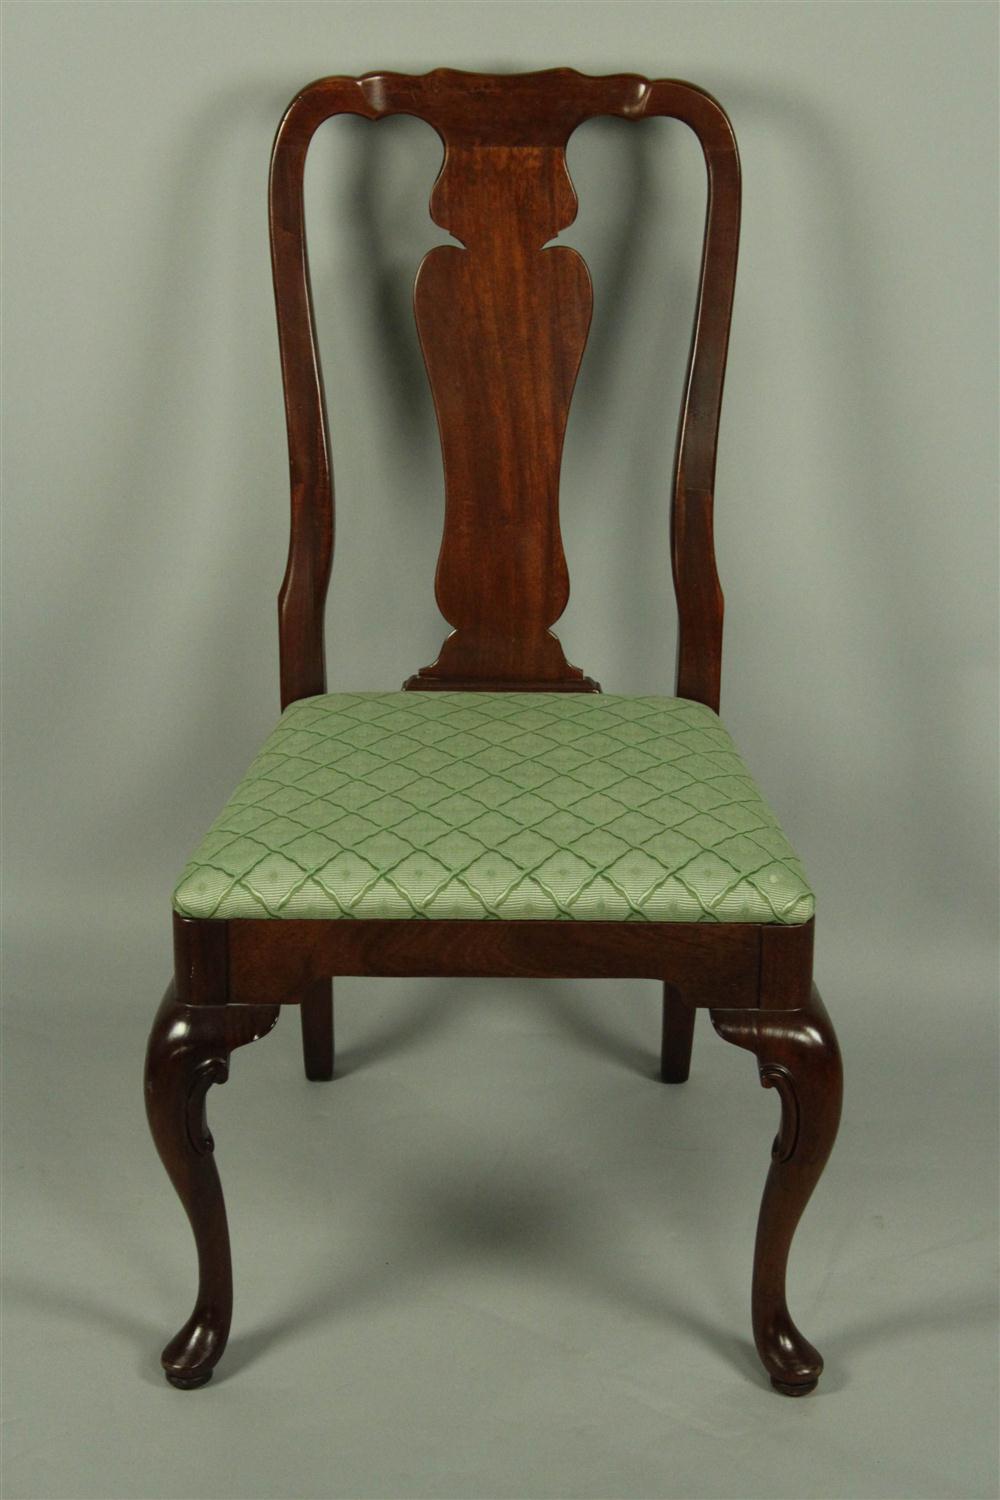 QUEEN ANNE STYLE MAHOGANY SIDE